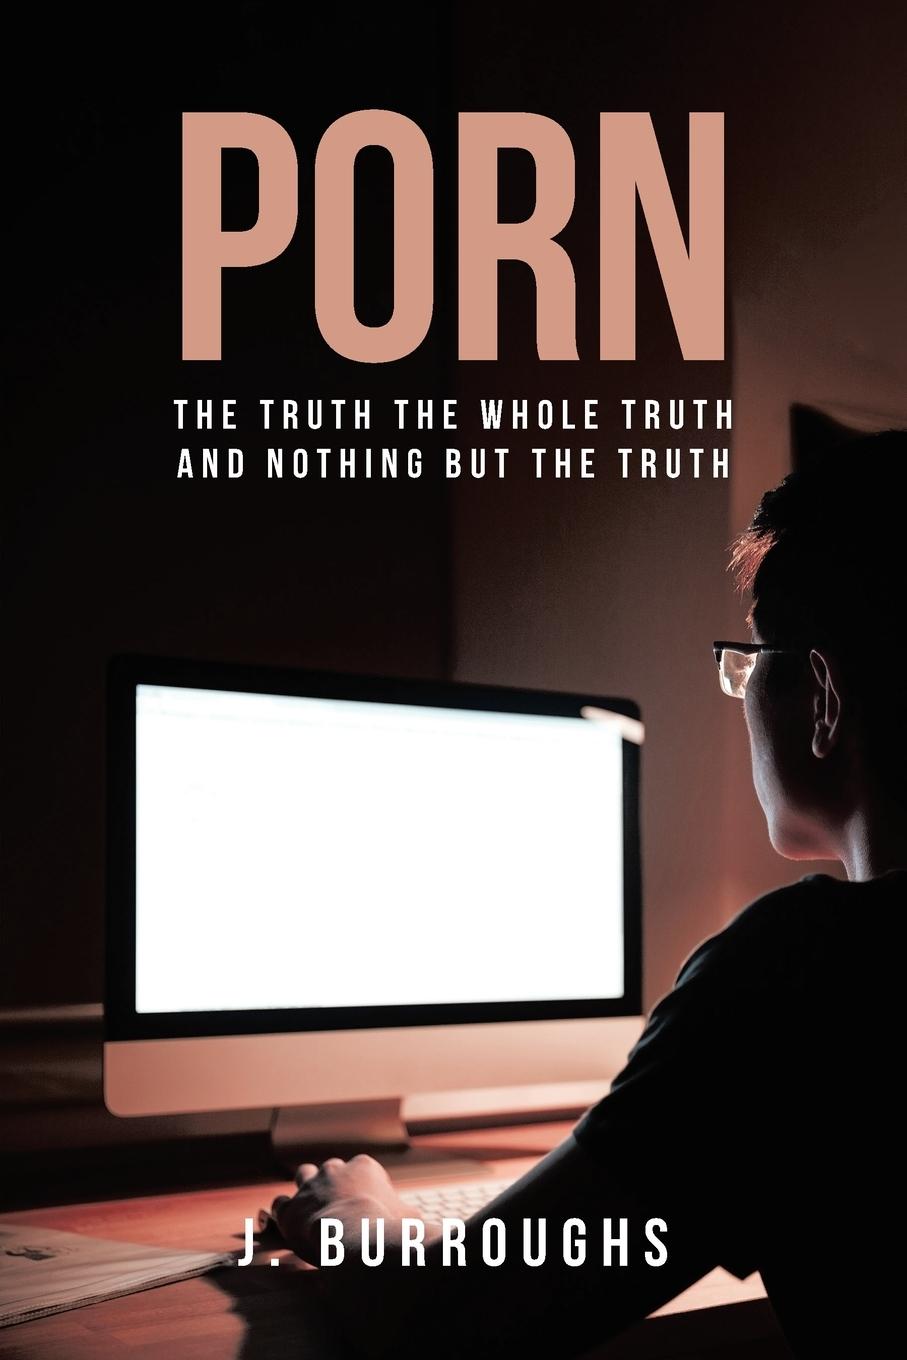 Kniha Porn-The Truth The Whole Truth and Nothing But The Truth BURROUGHS